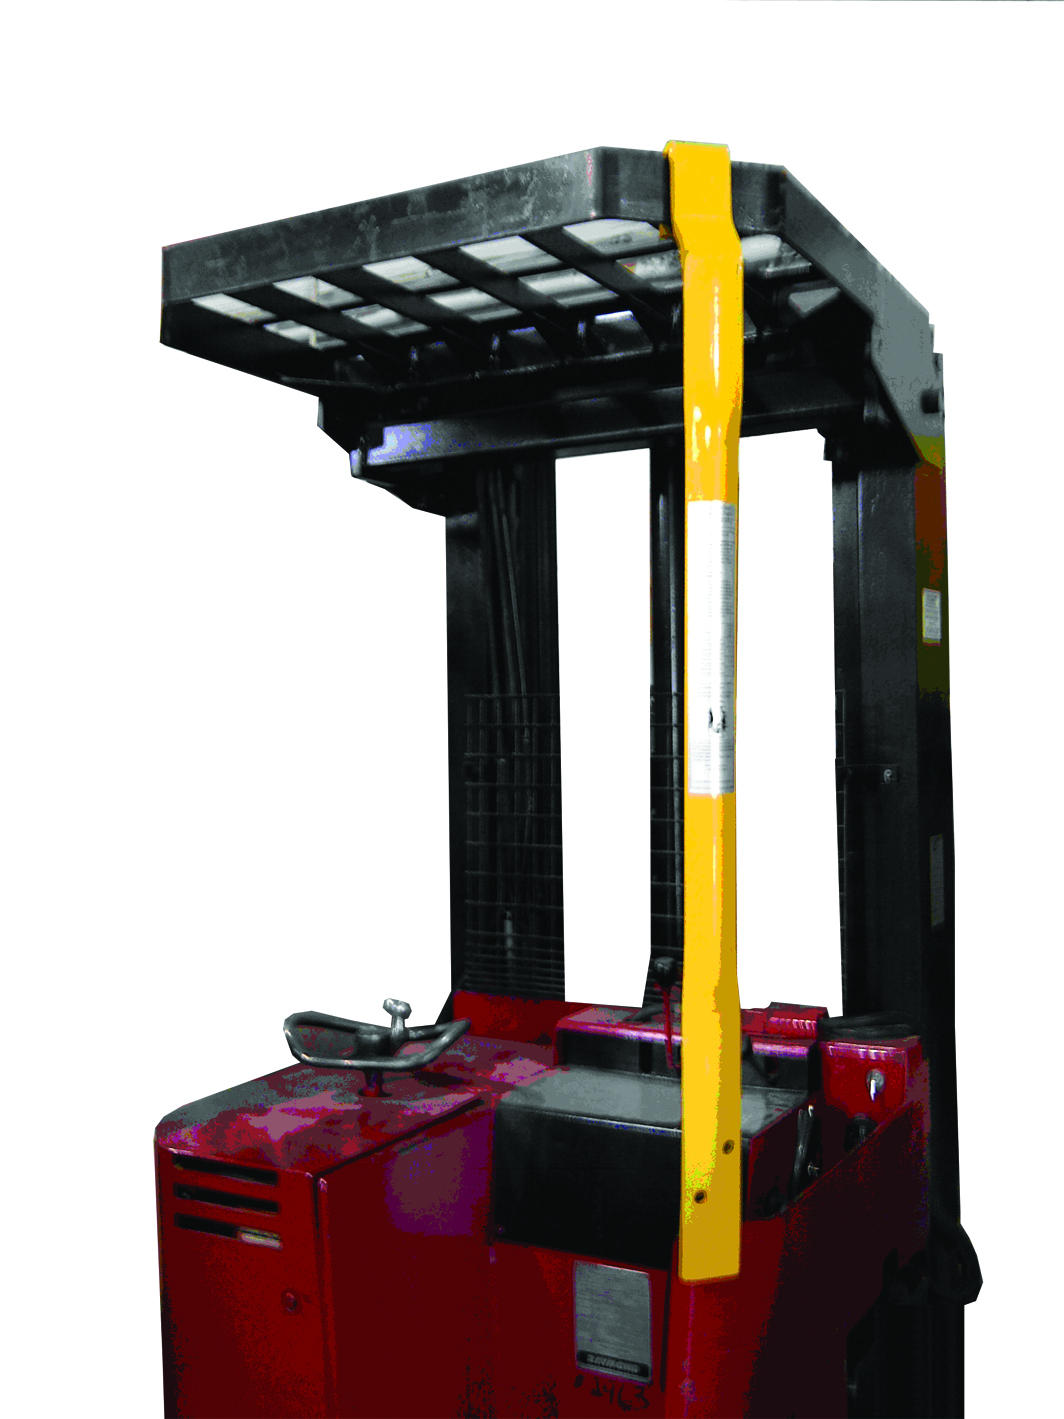 Forklift Rear Post Protects Against Injury On Stand Ups The Backbone